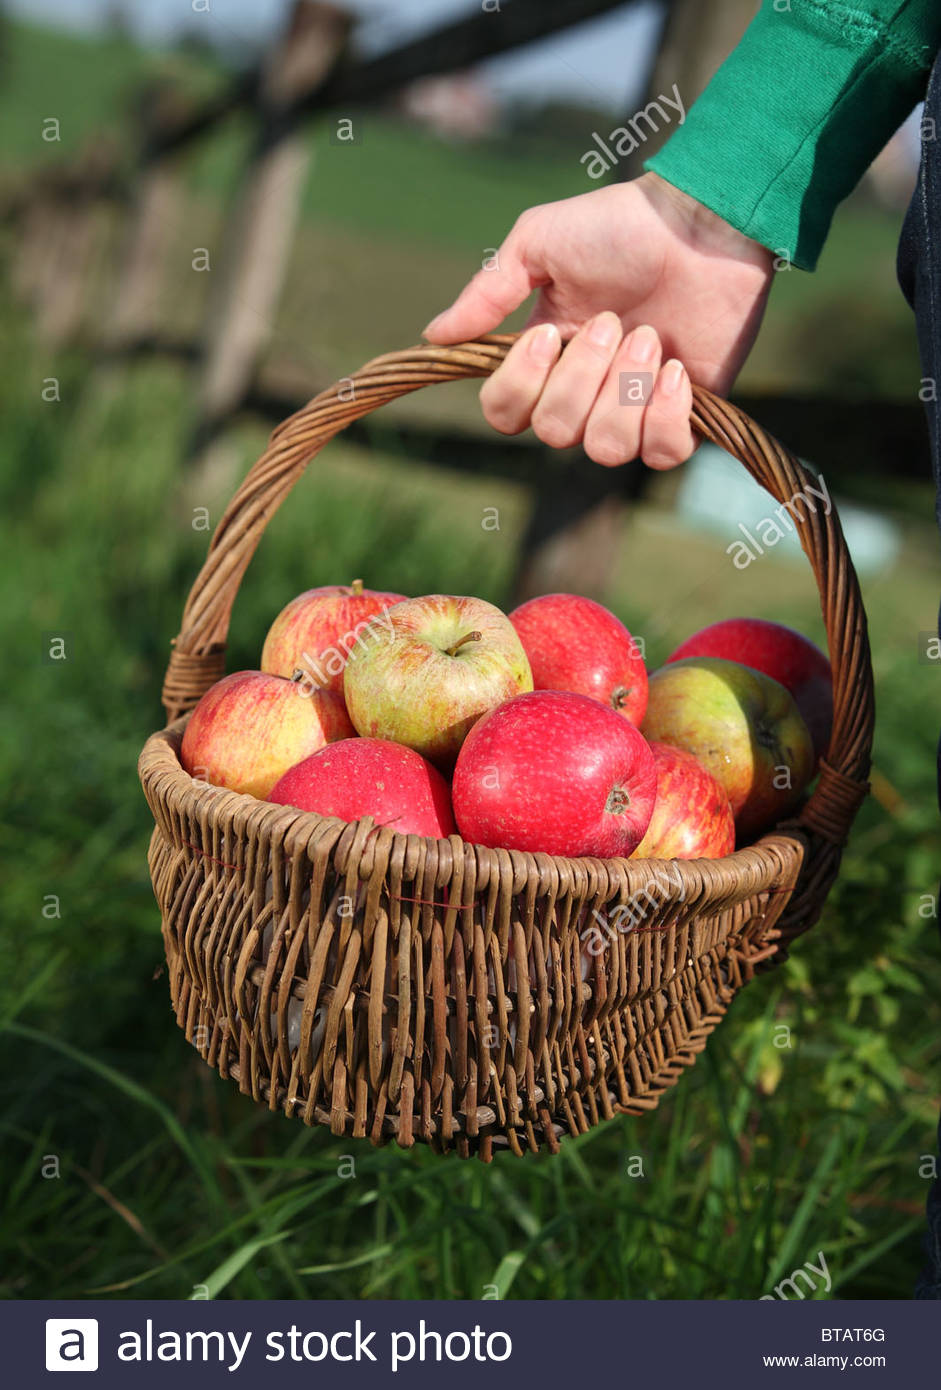 hand holding basket with apples Stock Photo - Alamy